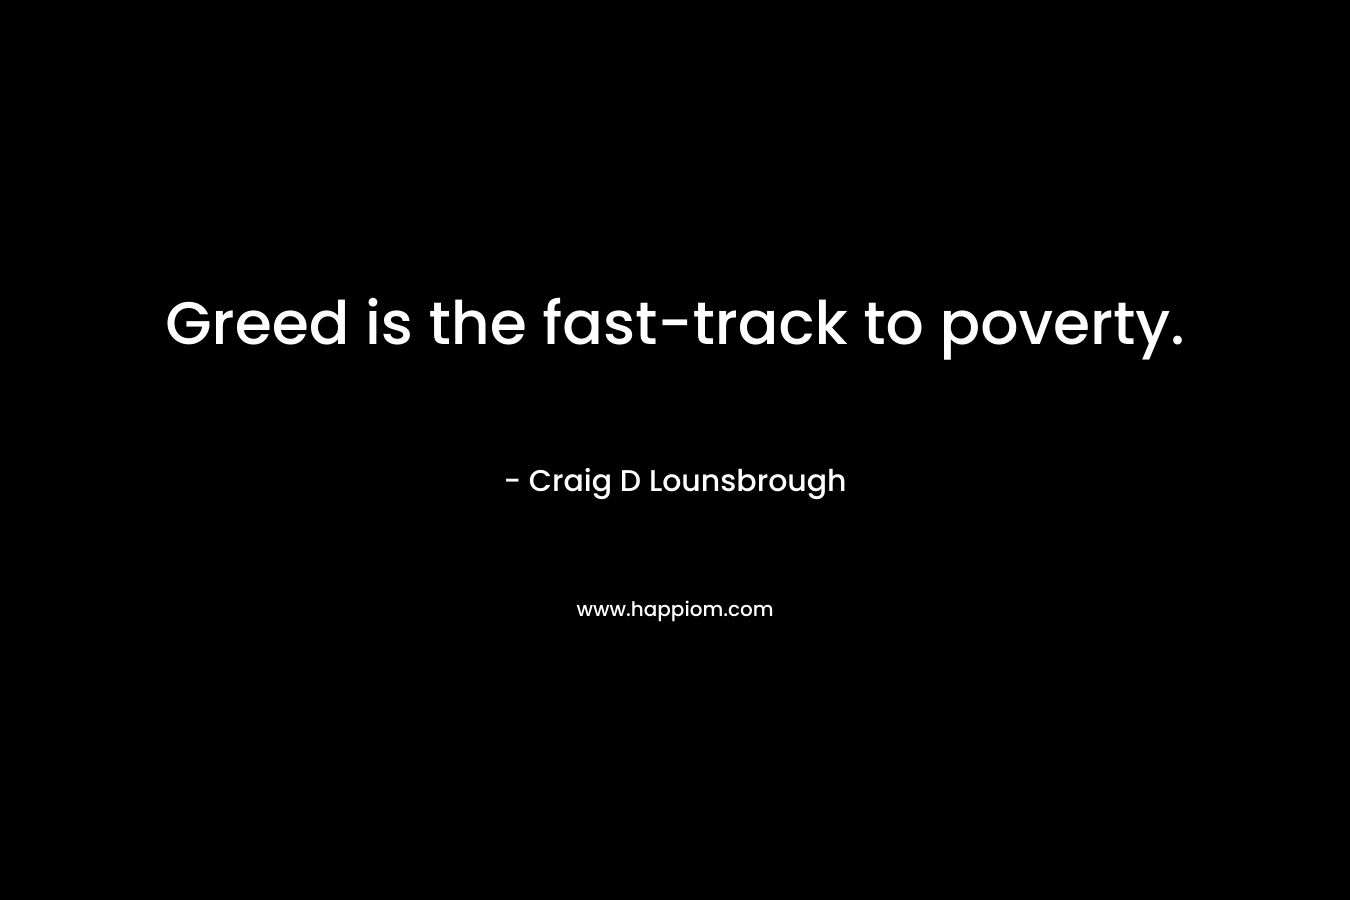 Greed is the fast-track to poverty.